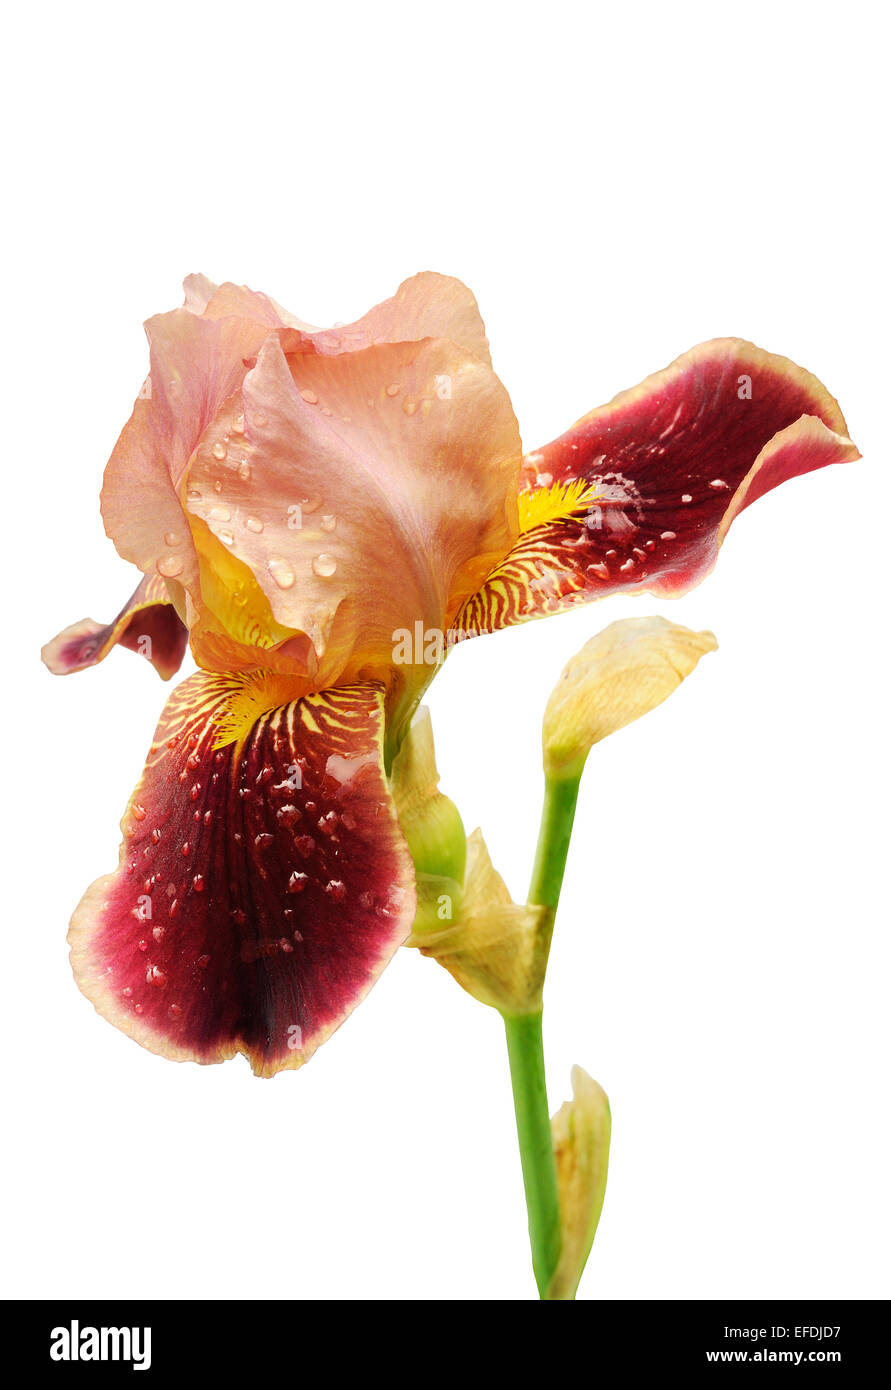 Bourgogne iris flower isolated over white background Banque D'Images